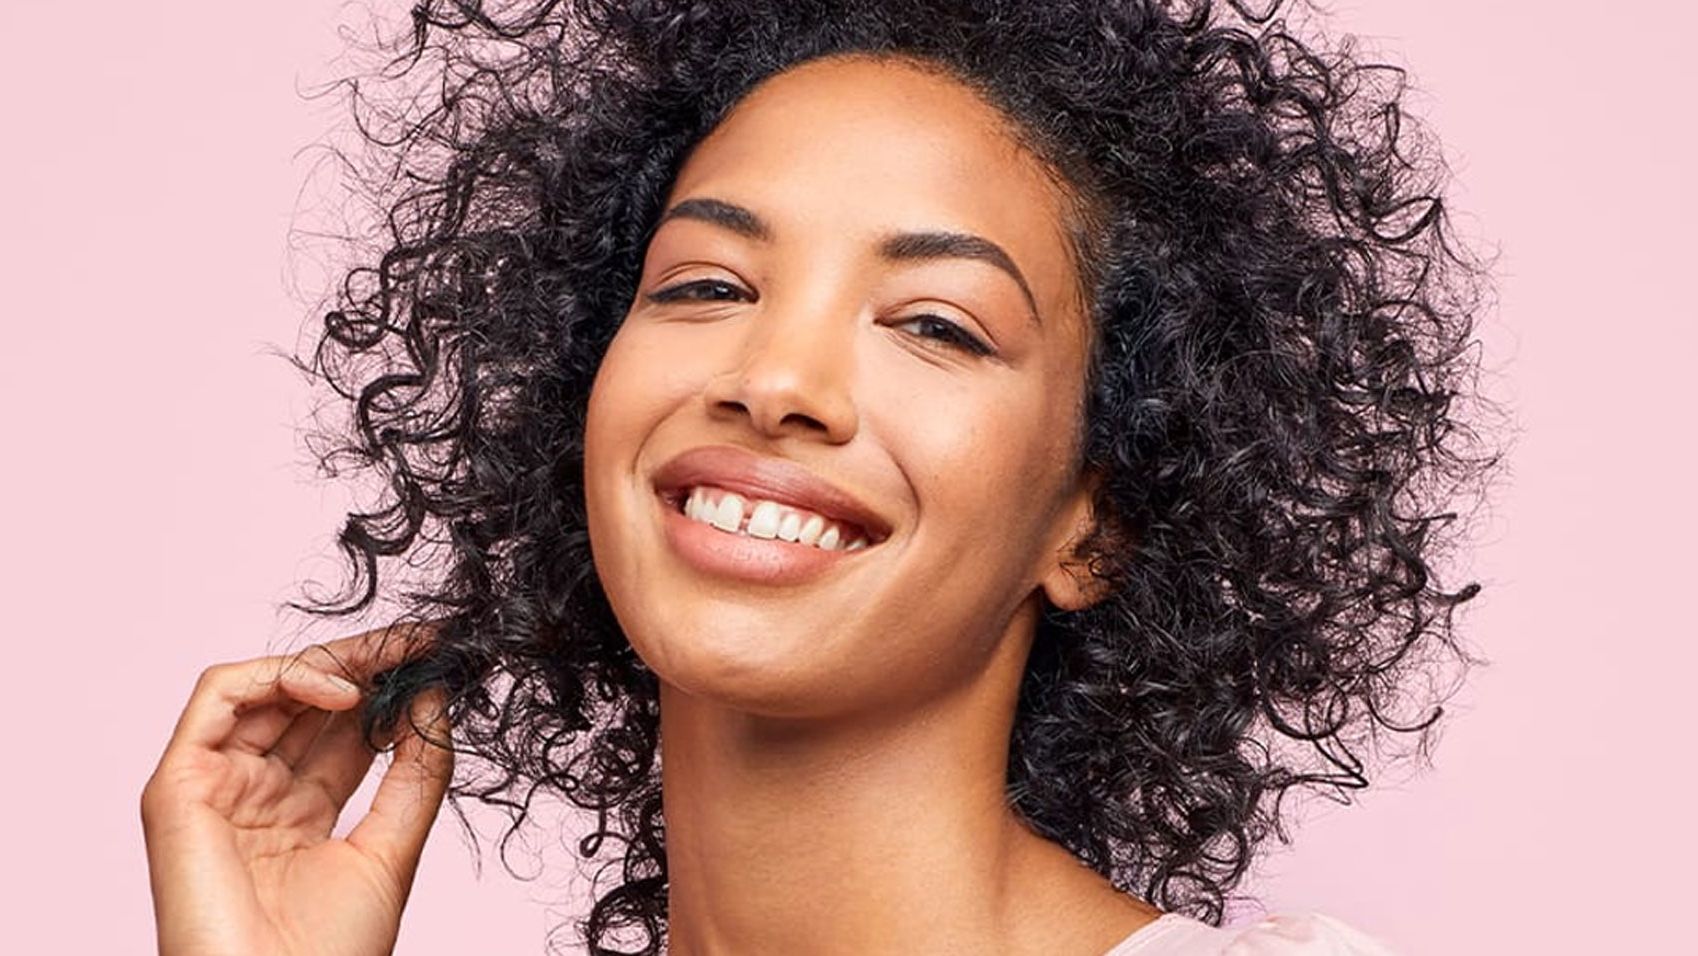 Are You Ready for a Natural Beauty Boost?